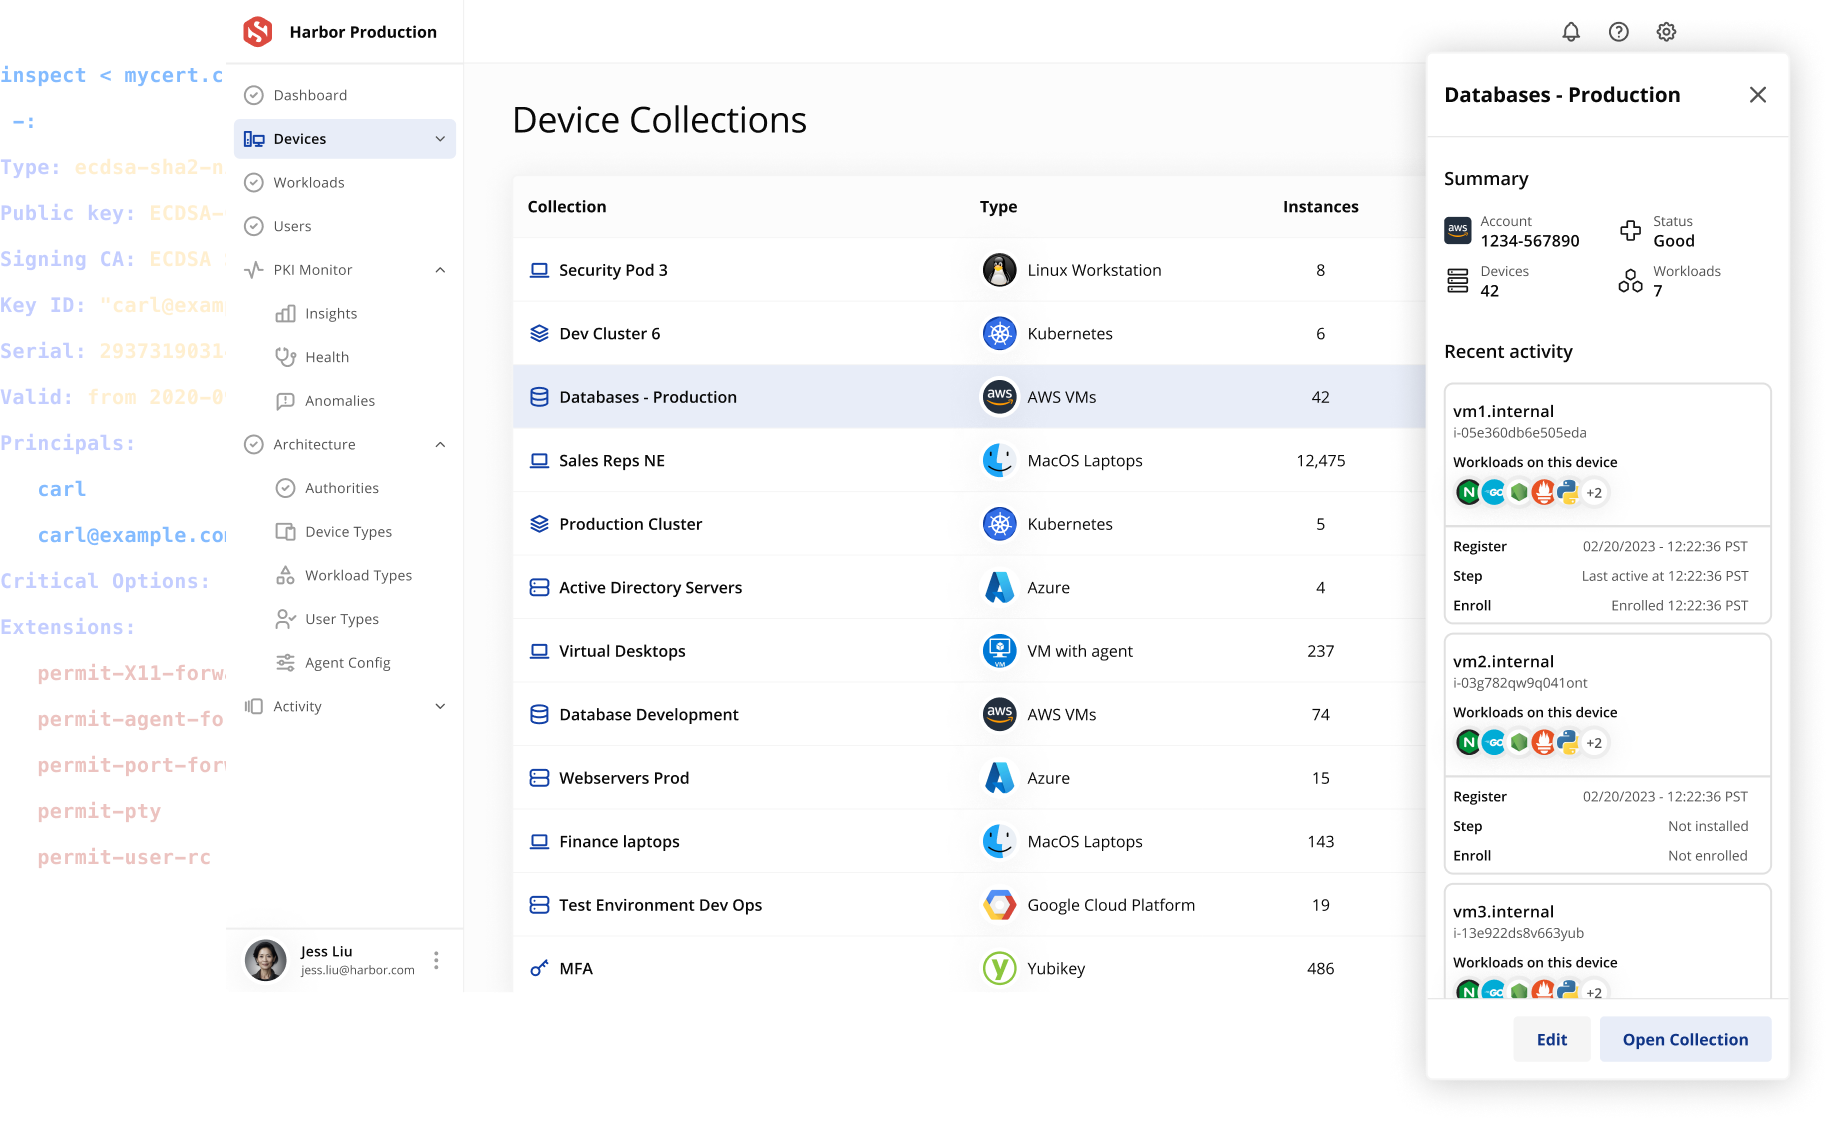 A UI screenshot of Smallstep, complete with device collections. Under Collections are titles like "security pod, dev cluster, databases-production" with the corresponding type like "linux workstation, kubernetes, AWS vm, Azure, Google Cloud Platform" etc.